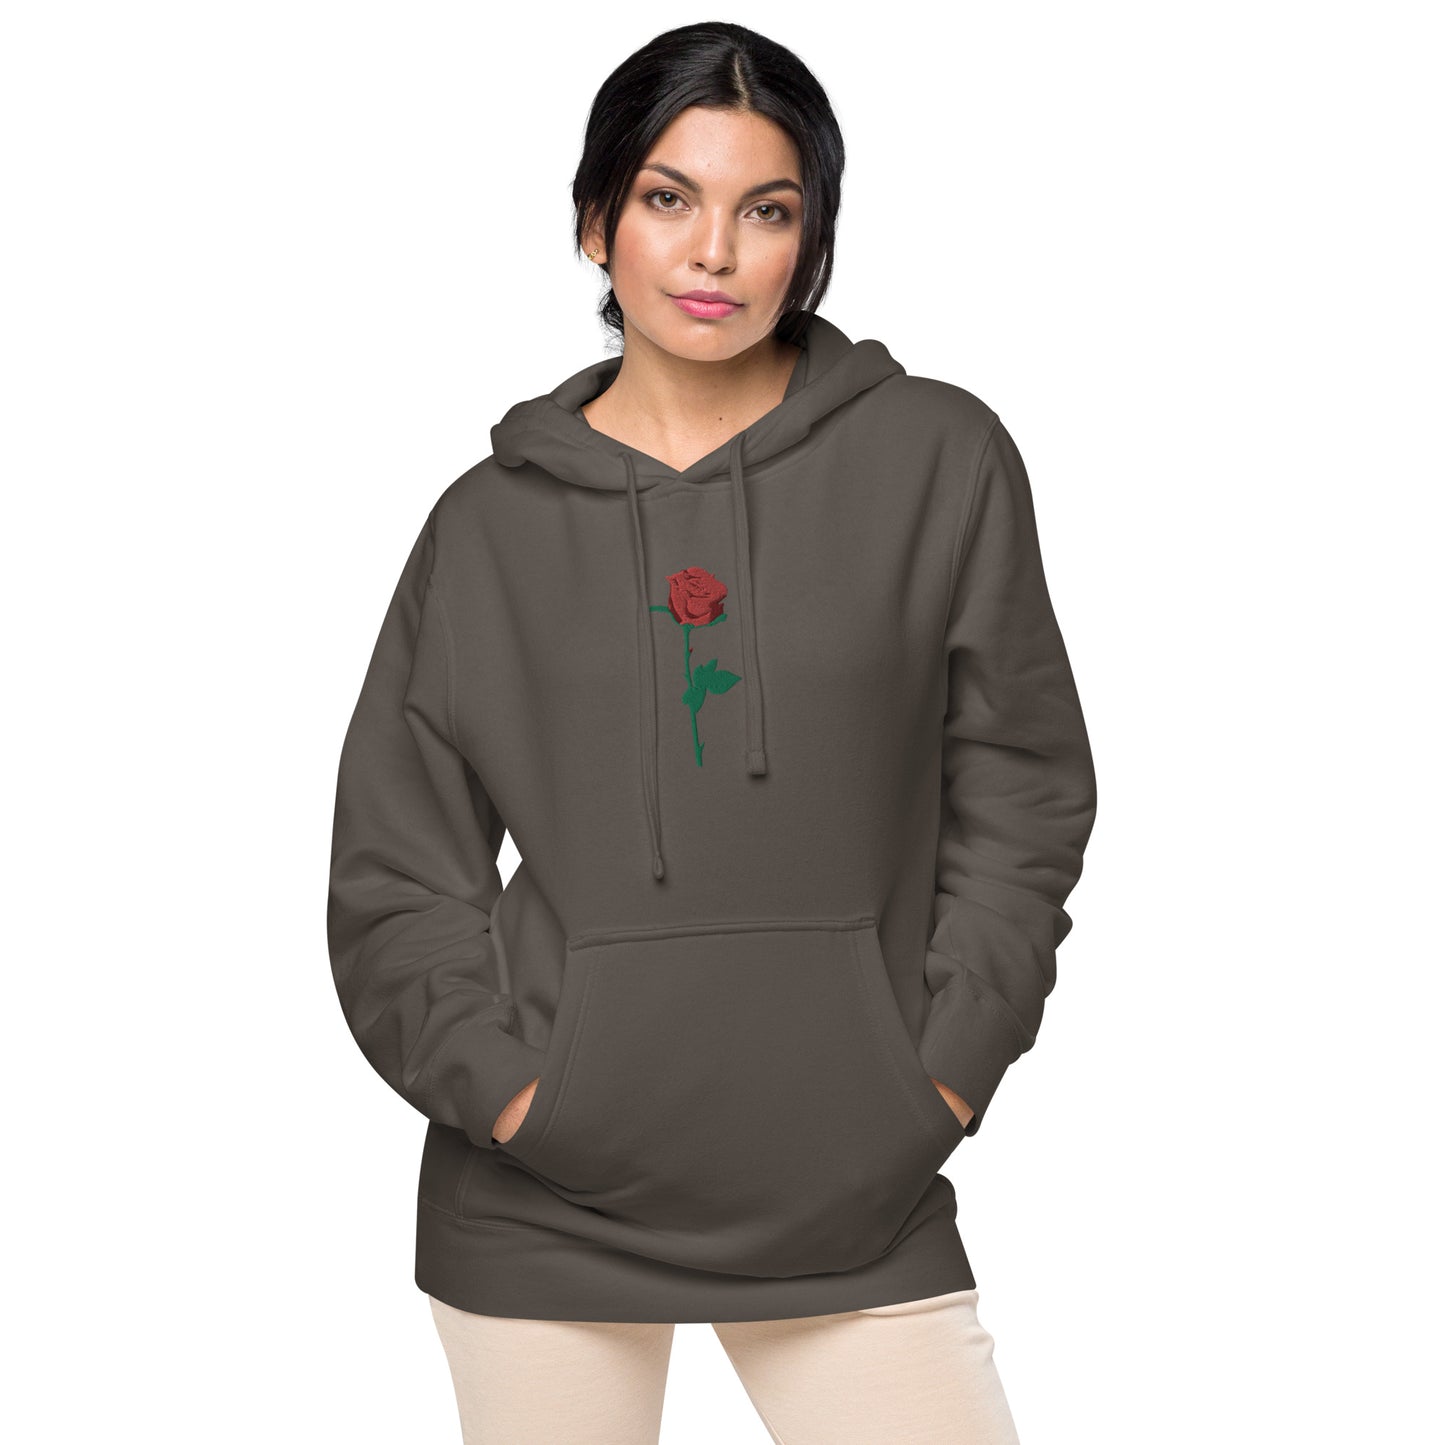 Adonis-Creations - Women's Pigment Dyed Cotton Hoodie ~ Large Chest Embroidery